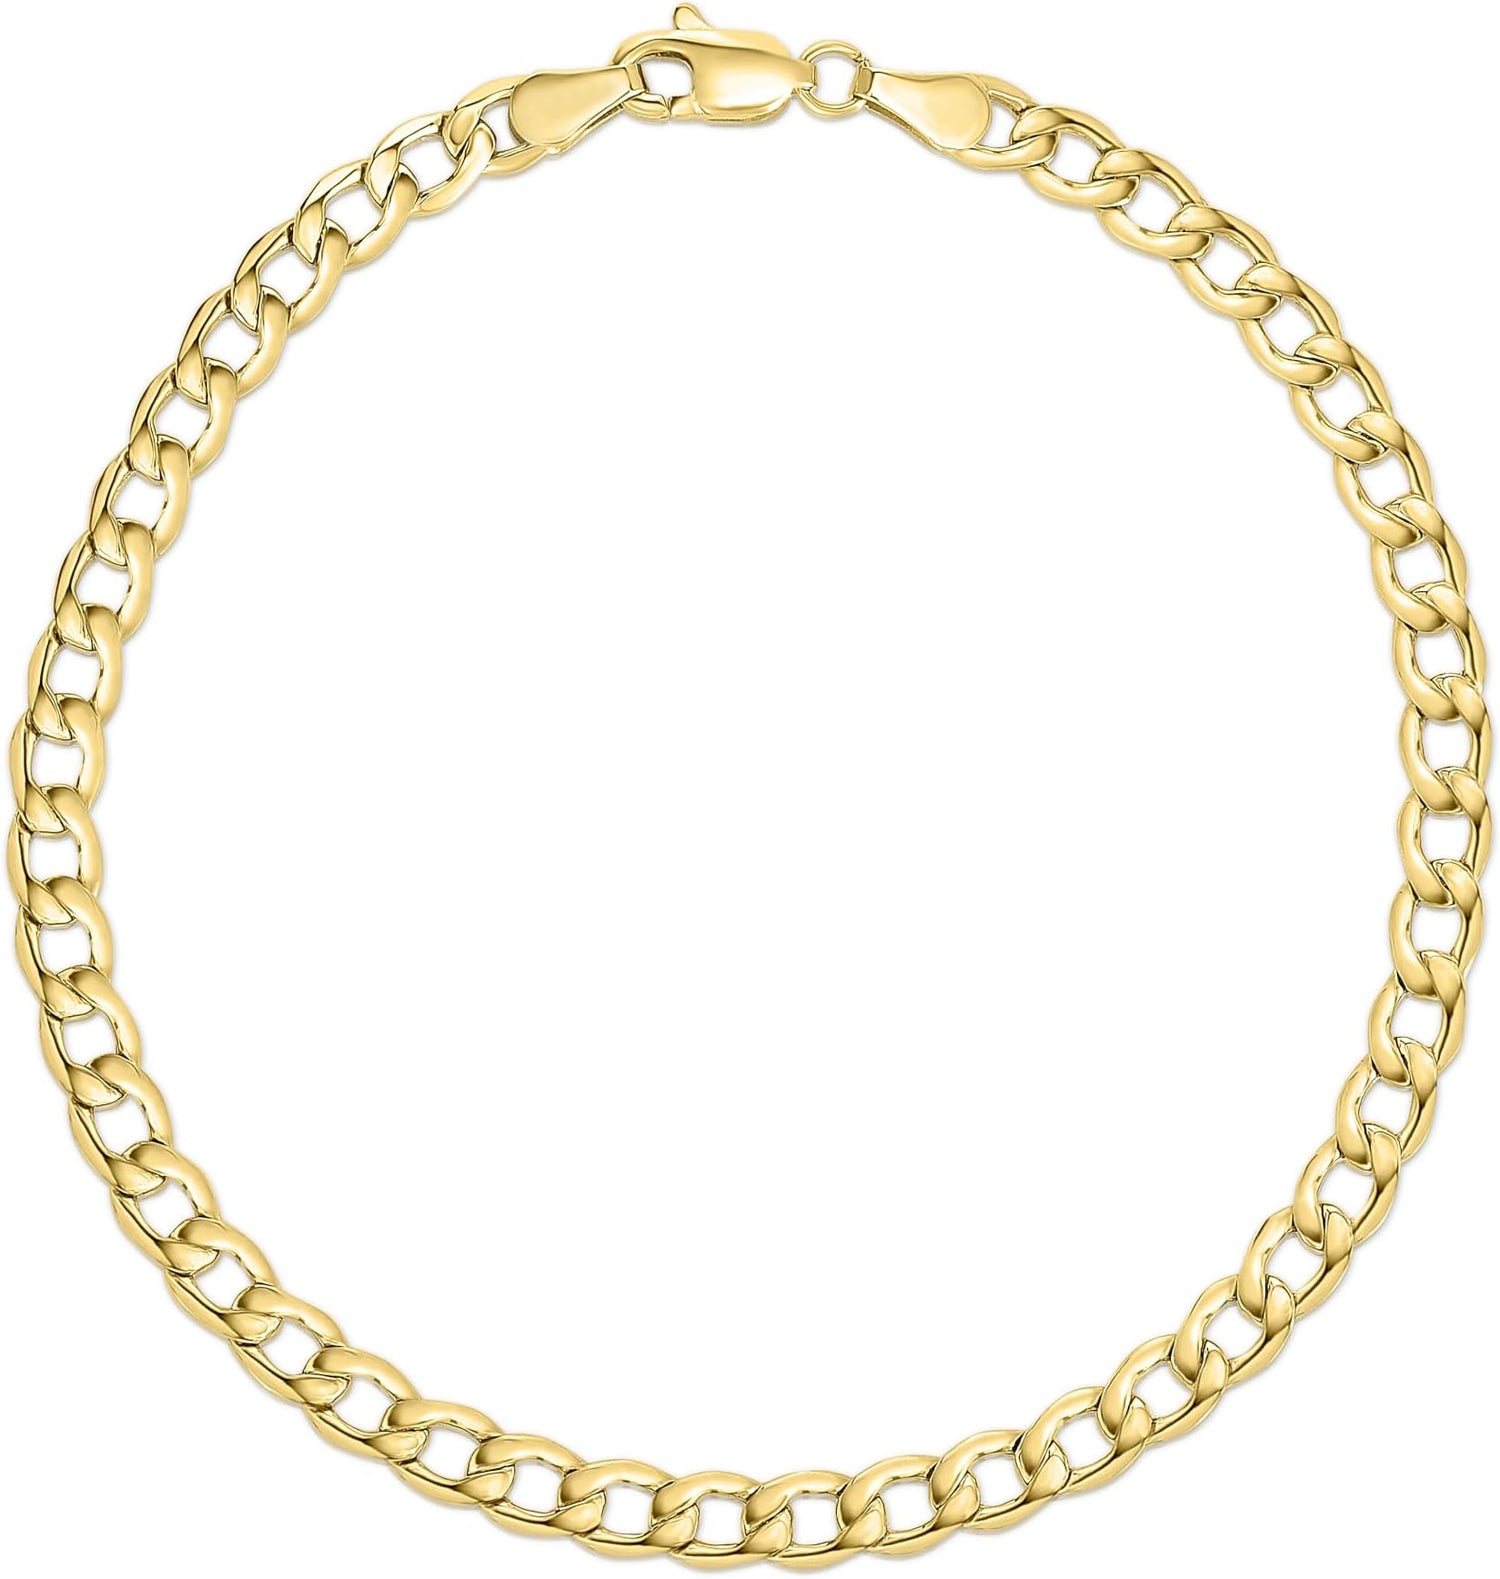 10k Yellow Gold 4mm Hollow Cuban Curb Link Bracelet or Anklet